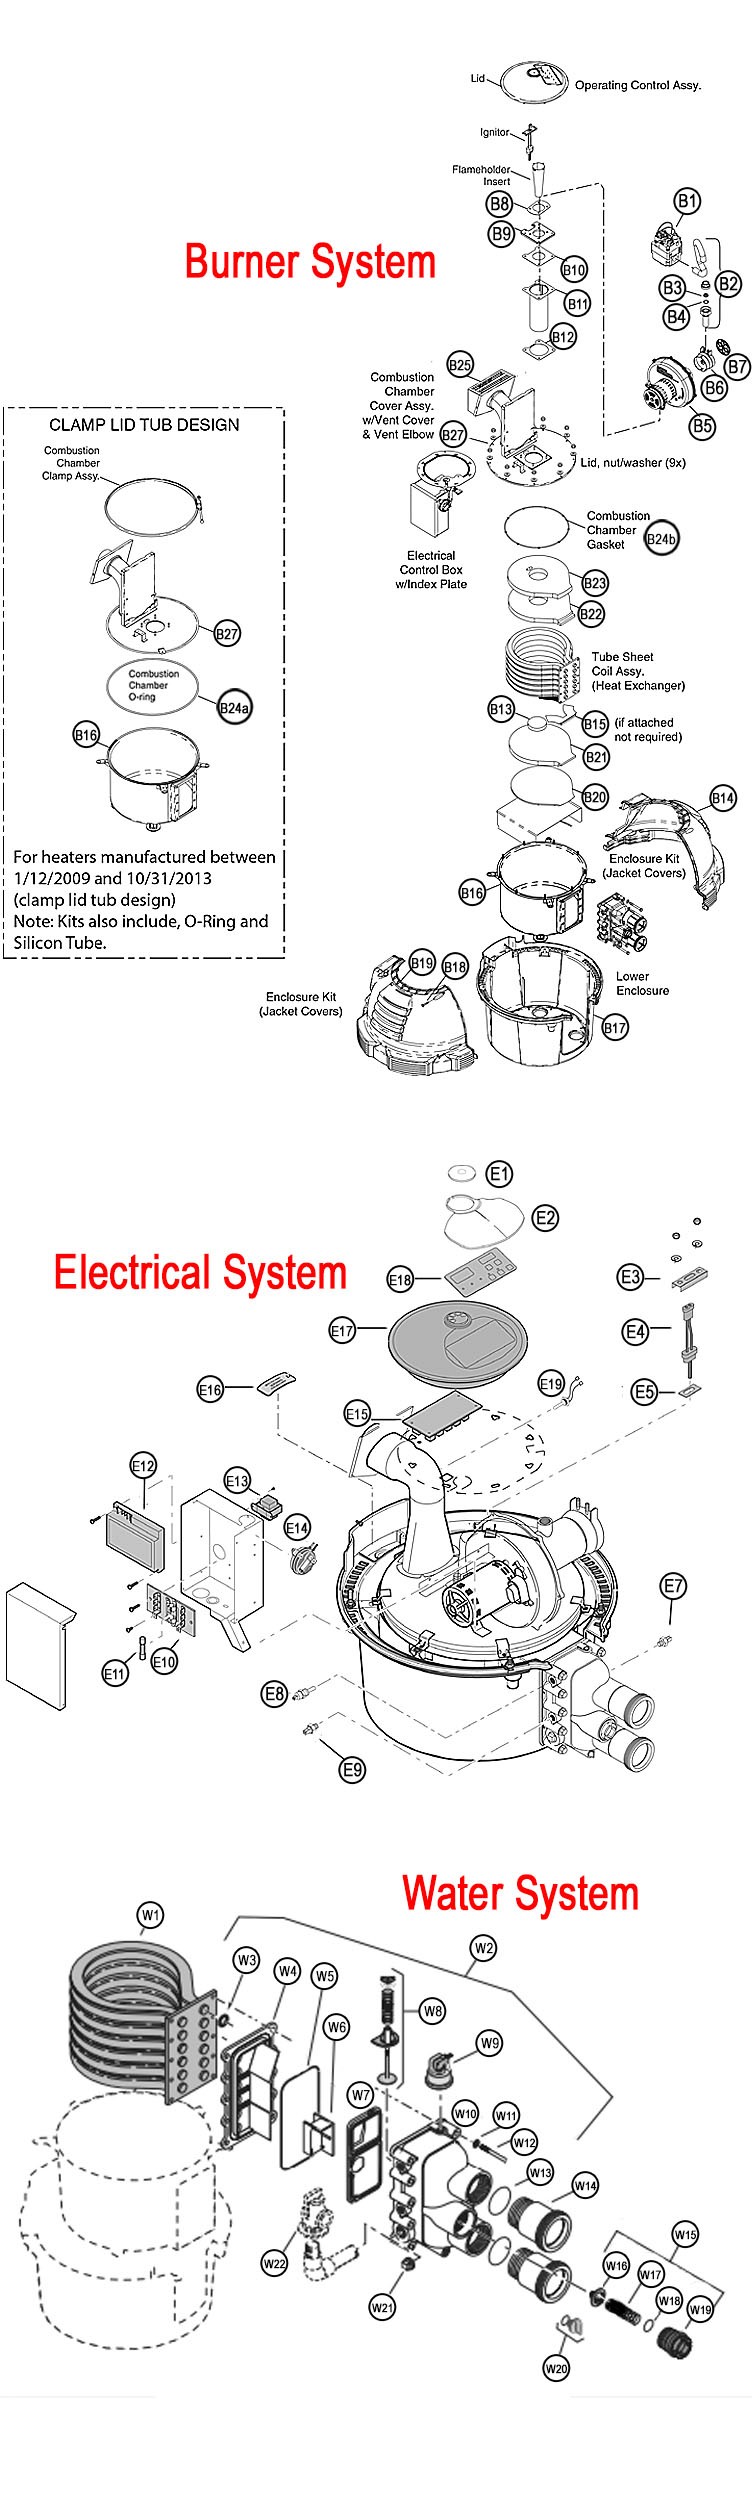 Sta-Rite Max-E-Therm Low NOx Pool Heater - Electronic Ignition - Propane - 400,000 BTU ASME - 460764 Parts Schematic